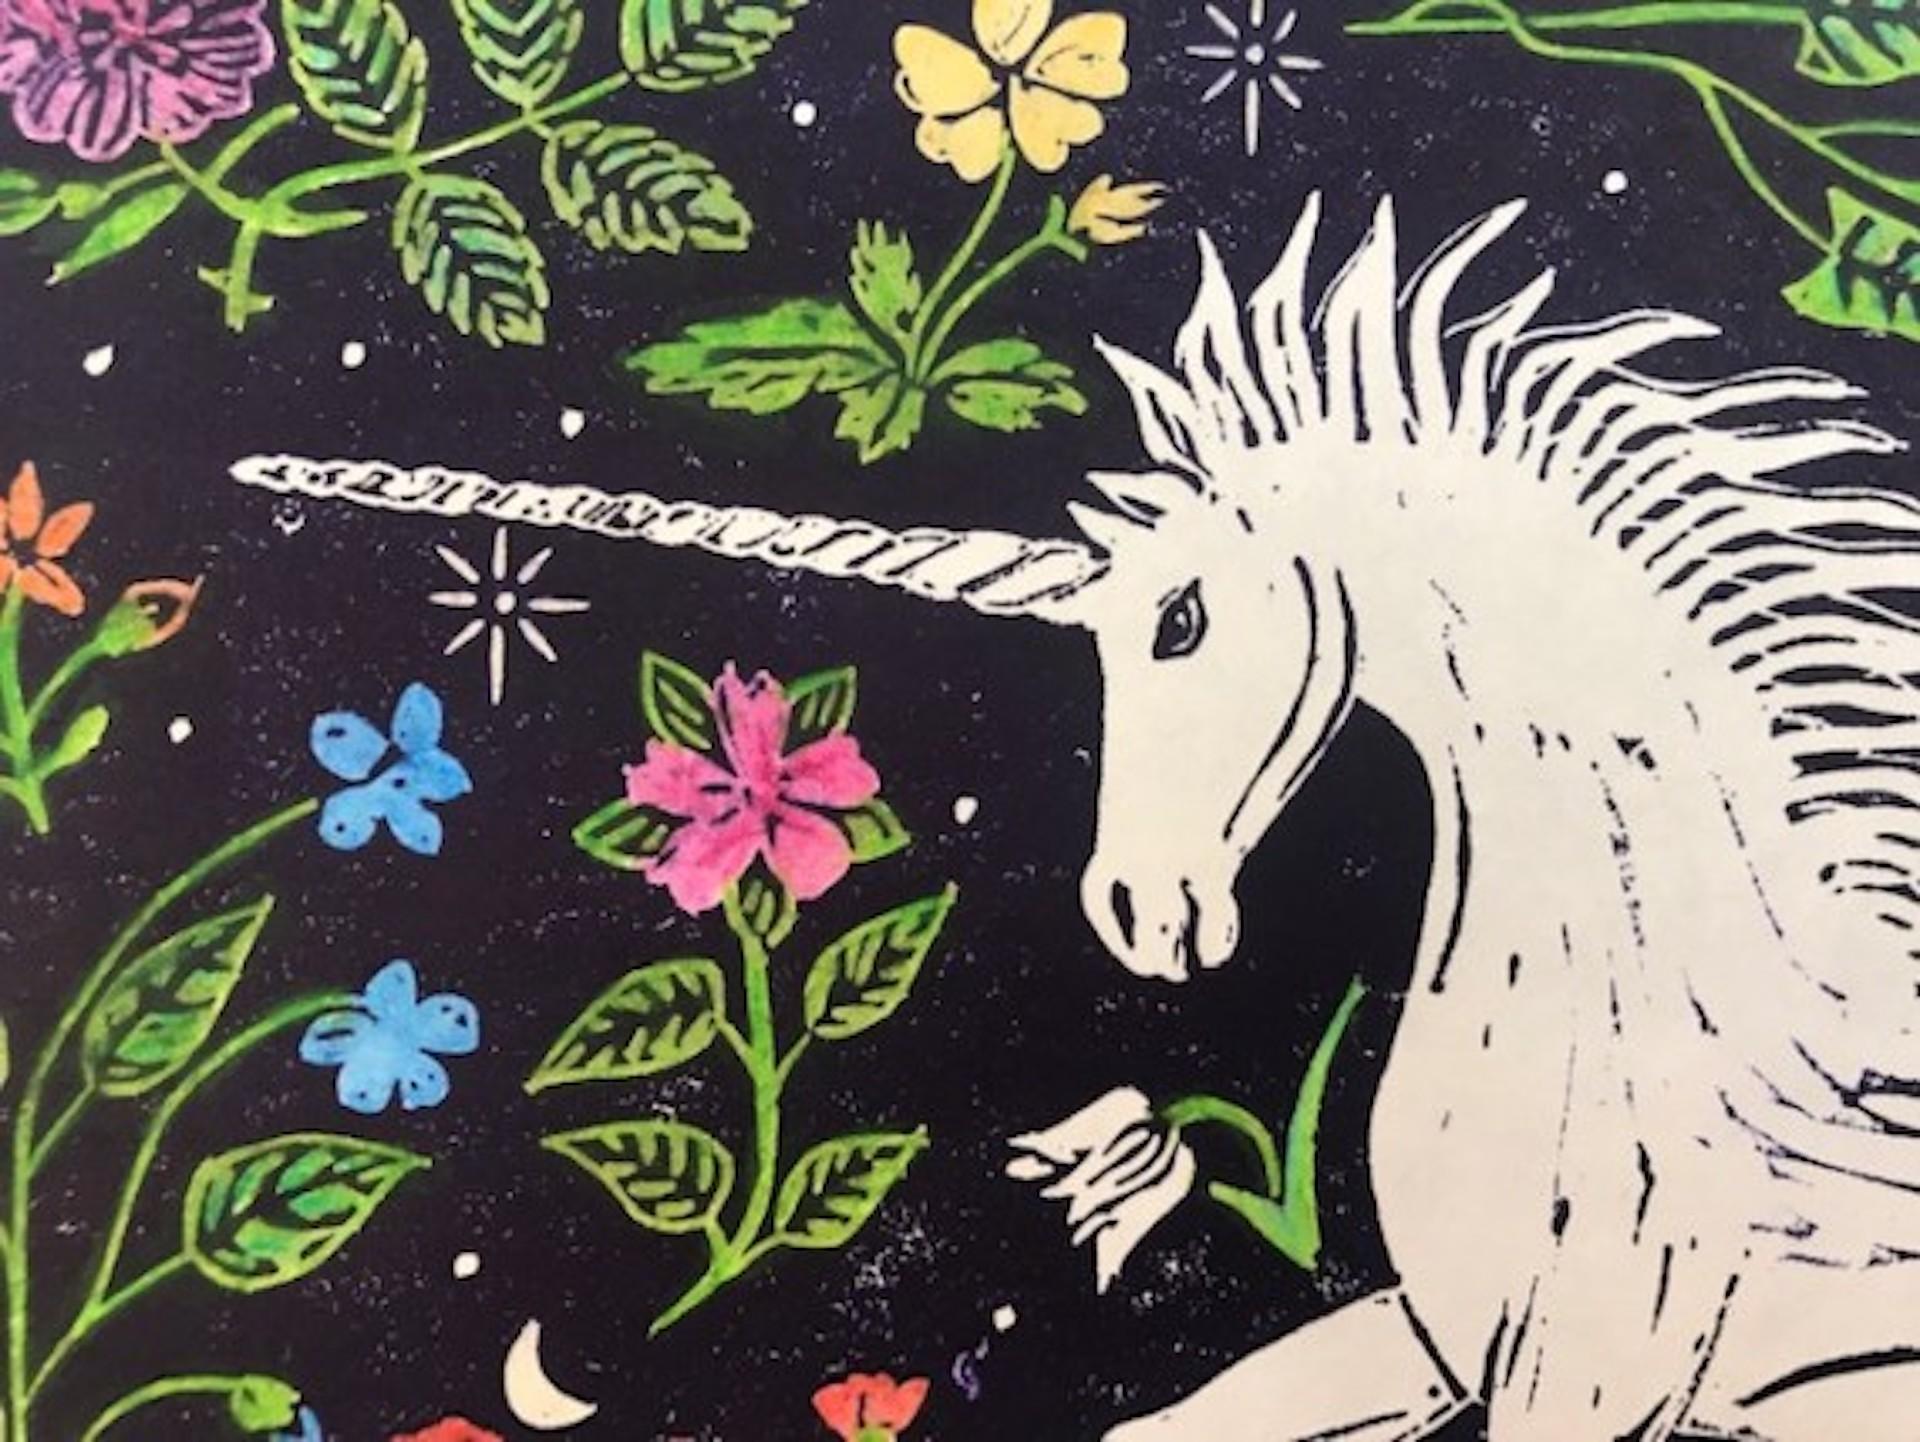 Millefleurs Unicorn by Kate Willows [2019]
limited edition

Ink and pencil on paper

Edition of 50

Image size: H:20 cm x W:30 cm

Sold Unframed

Please note that insitu images are purely an indication of how a piece may look

An original limited